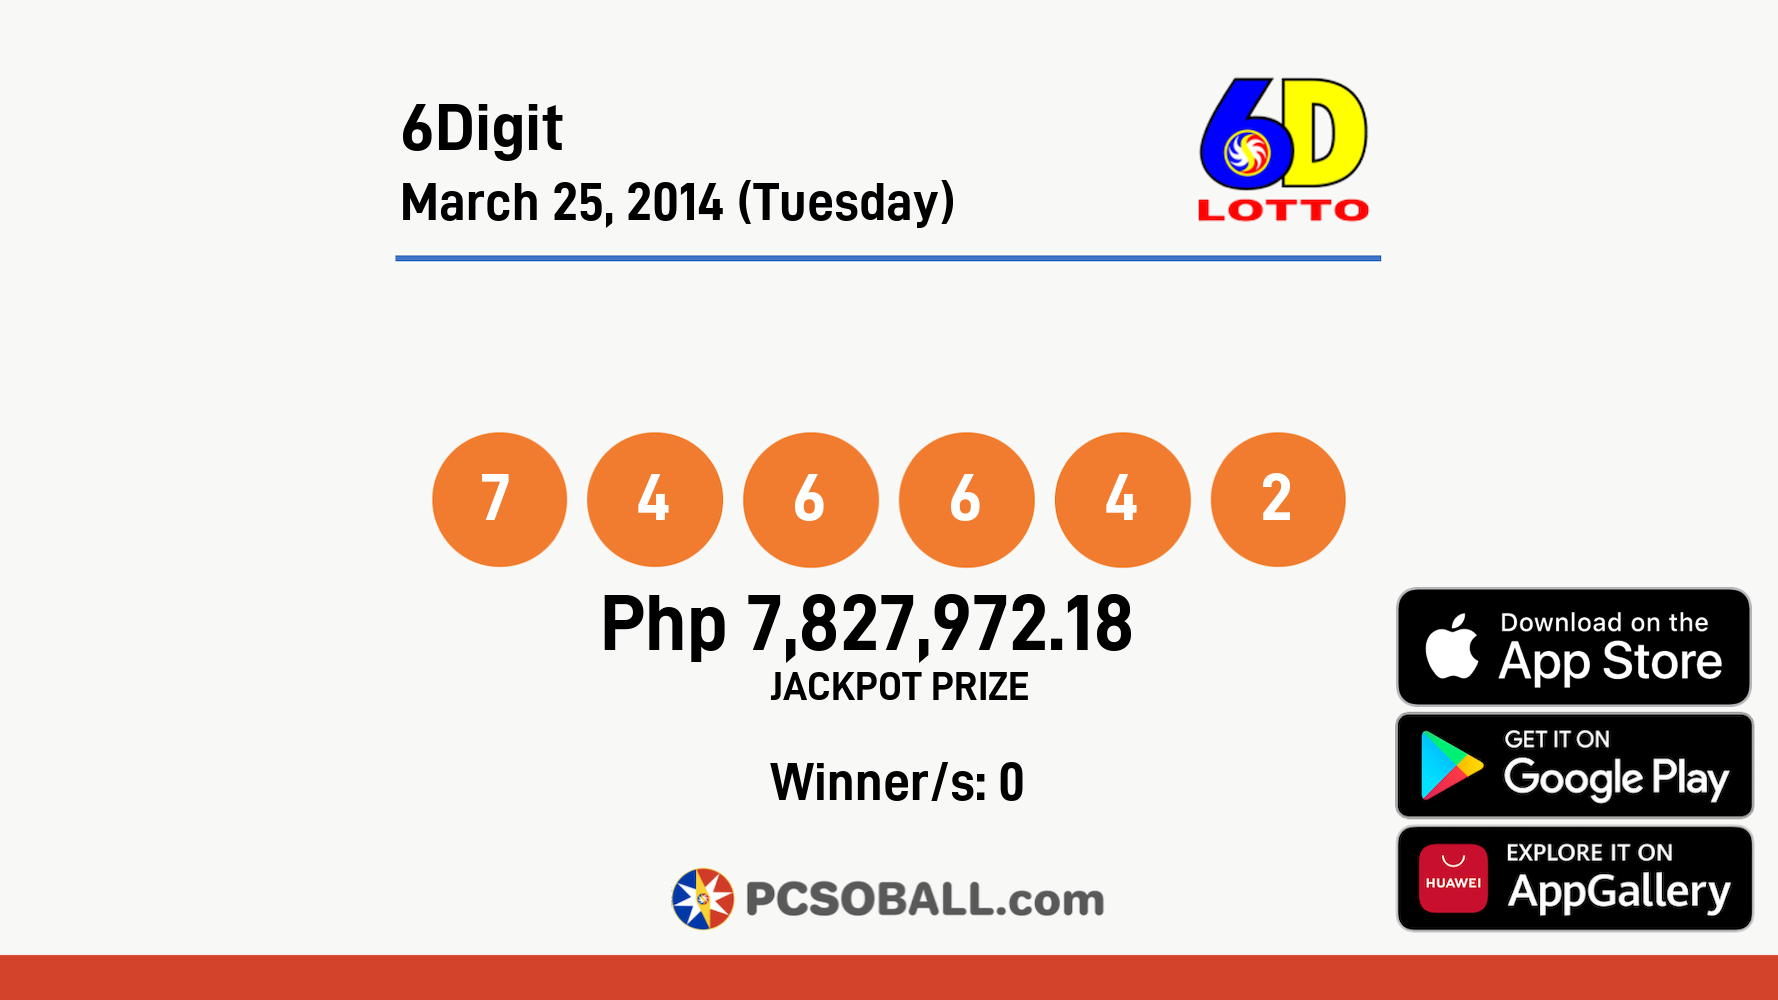 6Digit March 25, 2014 (Tuesday) Result